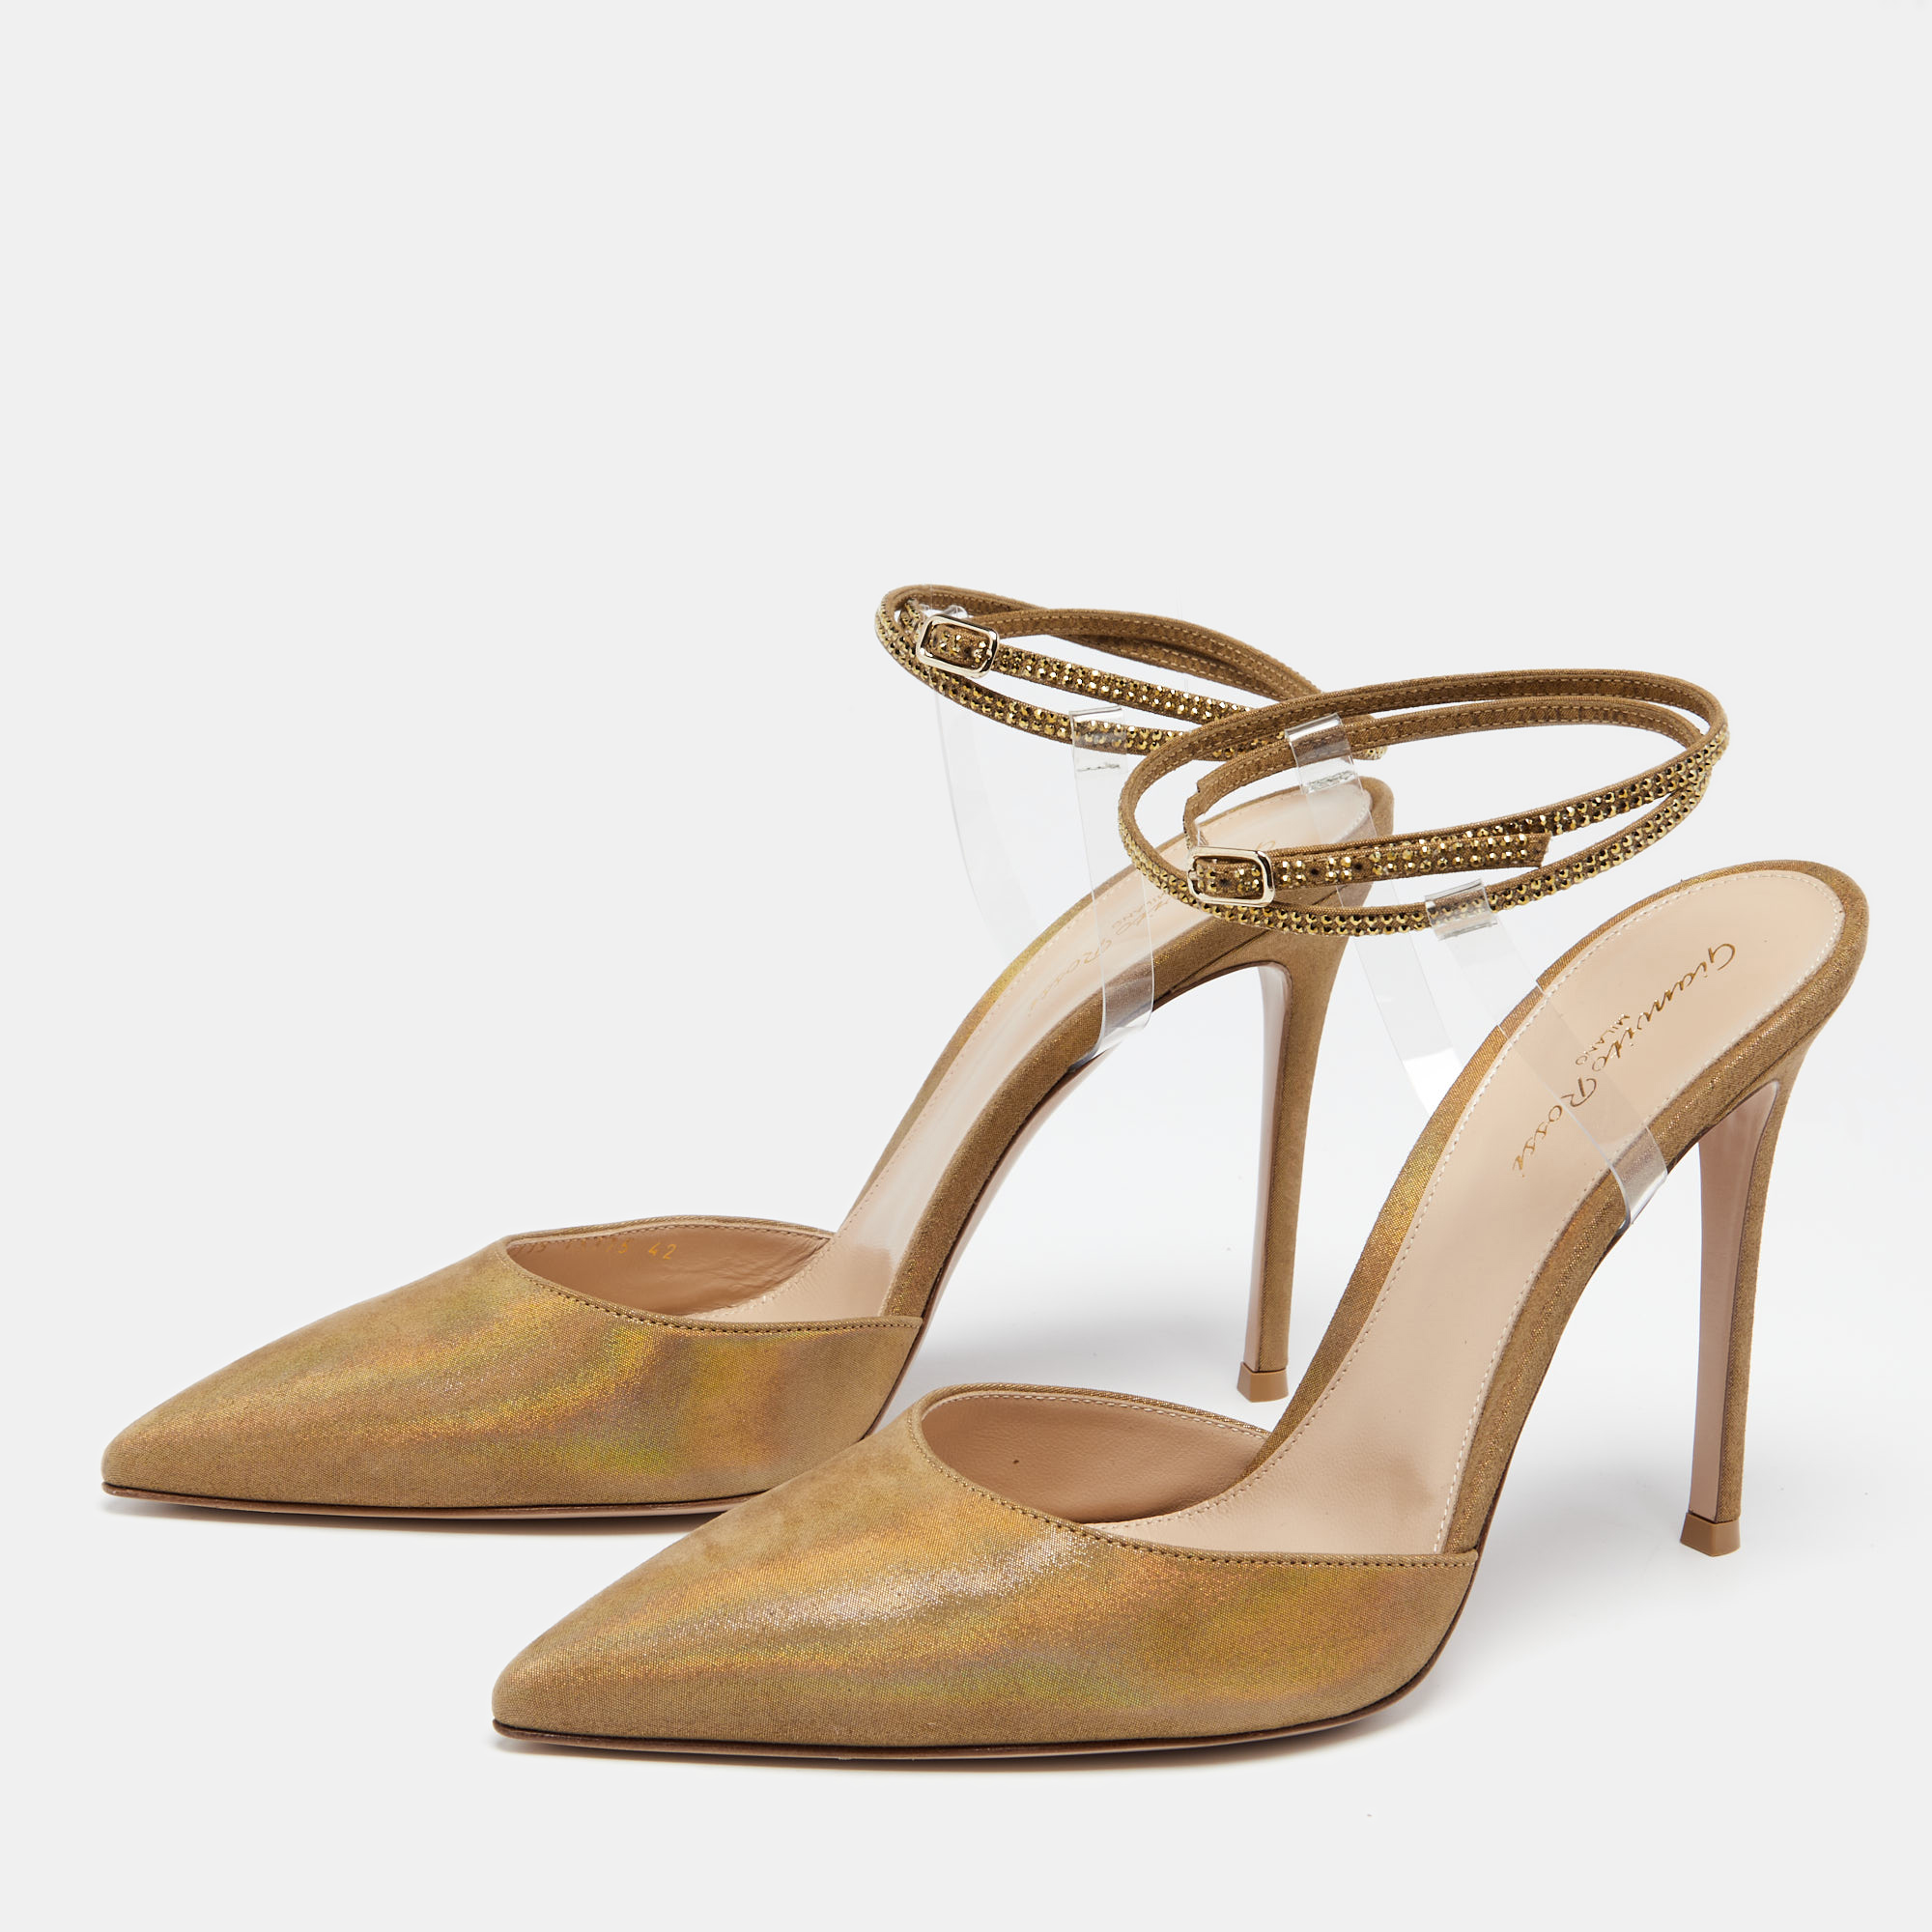 

Gianvito Rossi Metallic Gold Glitter Nubuck Leather And PVC Jewel Crystal Embellished Ankle Strap Sandals Size